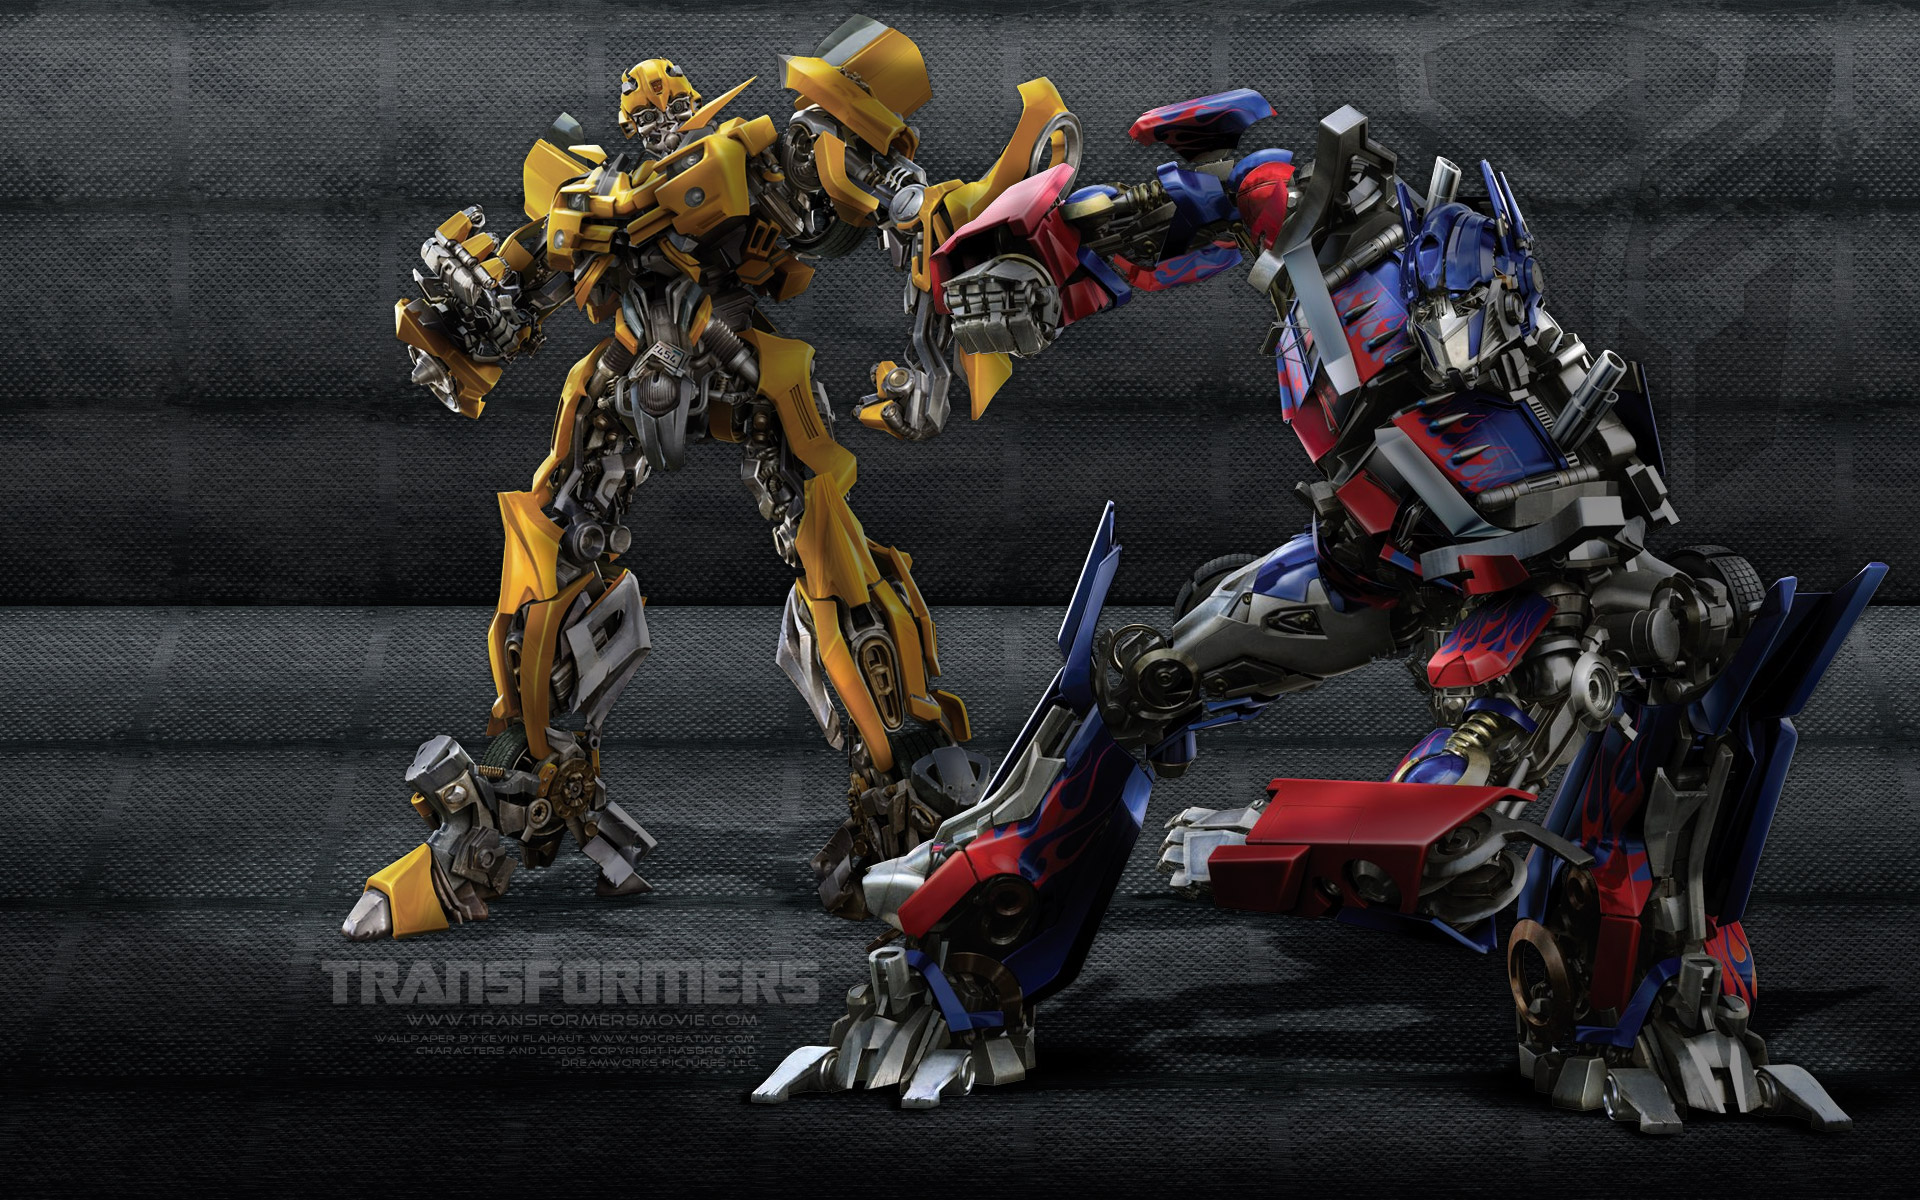 Transformers Collection Wallpapers - Wallpaper Cave